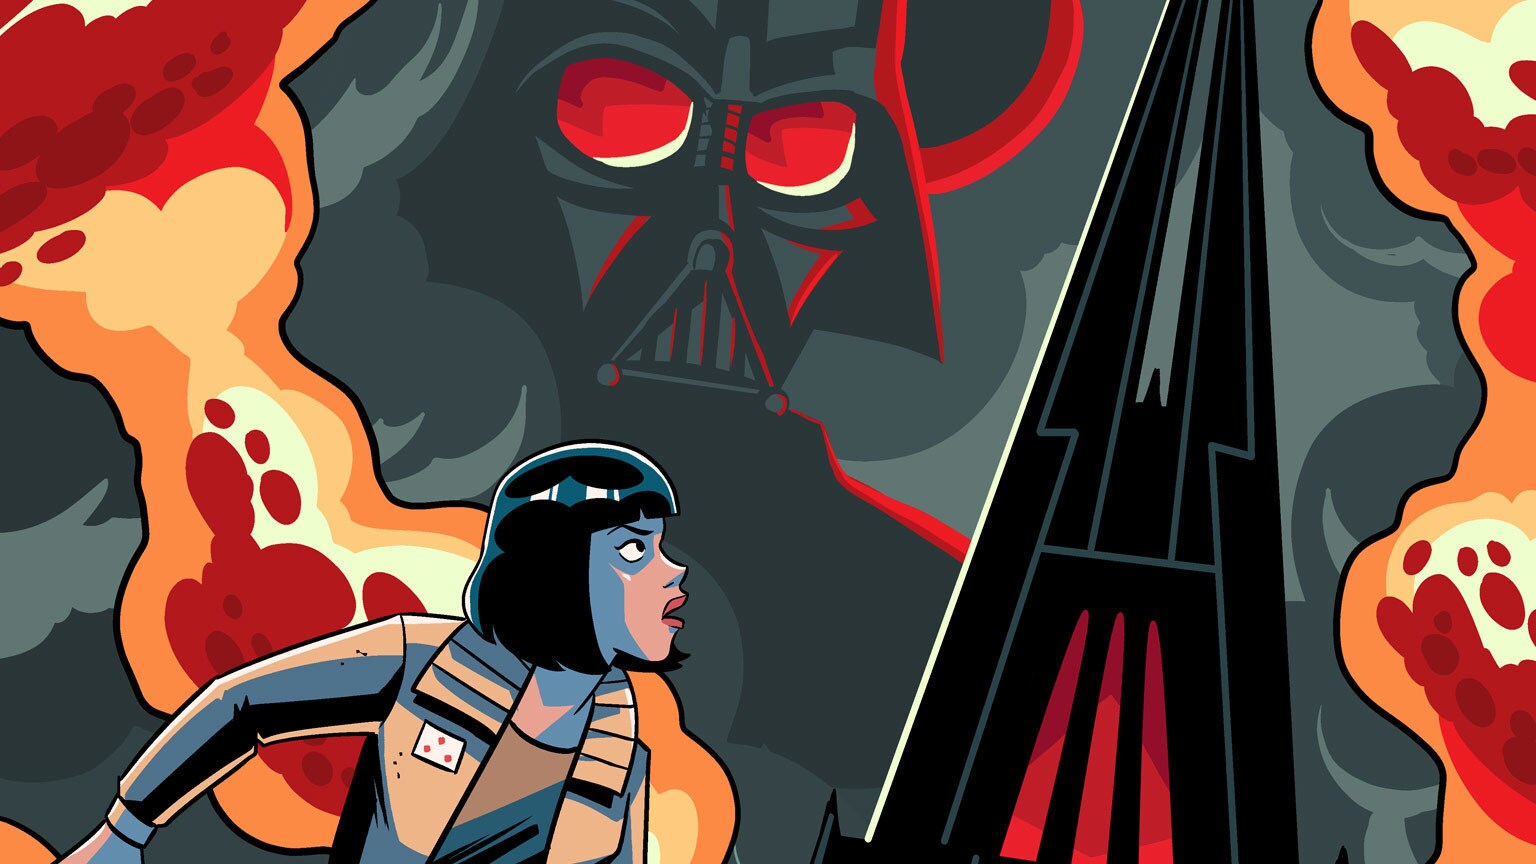 The Galaxy in Comics: Over 5 Issues, Tales from Vader's Castle Delivers Fun Star Wars Chills